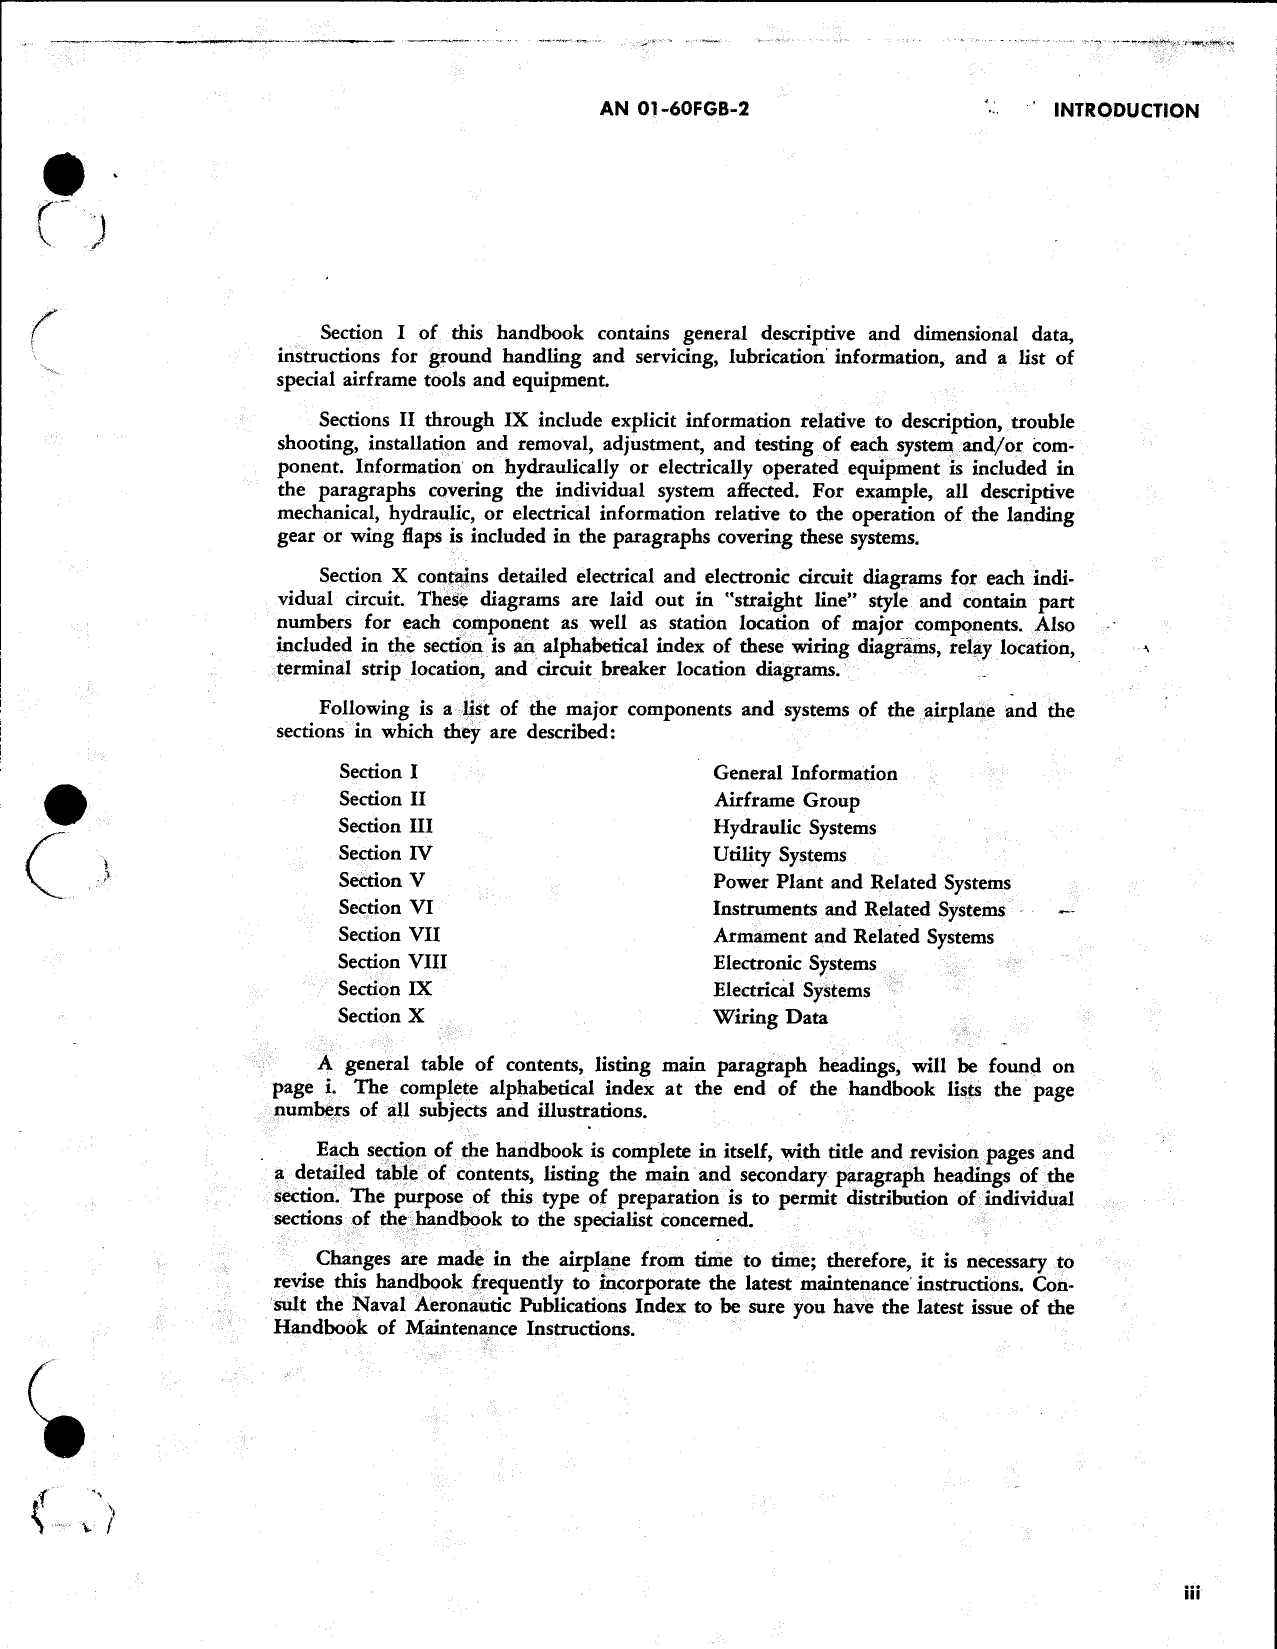 Sample page  5 from AirCorps Library document: Handbook Maintenance Instructions, T-28B T-28C